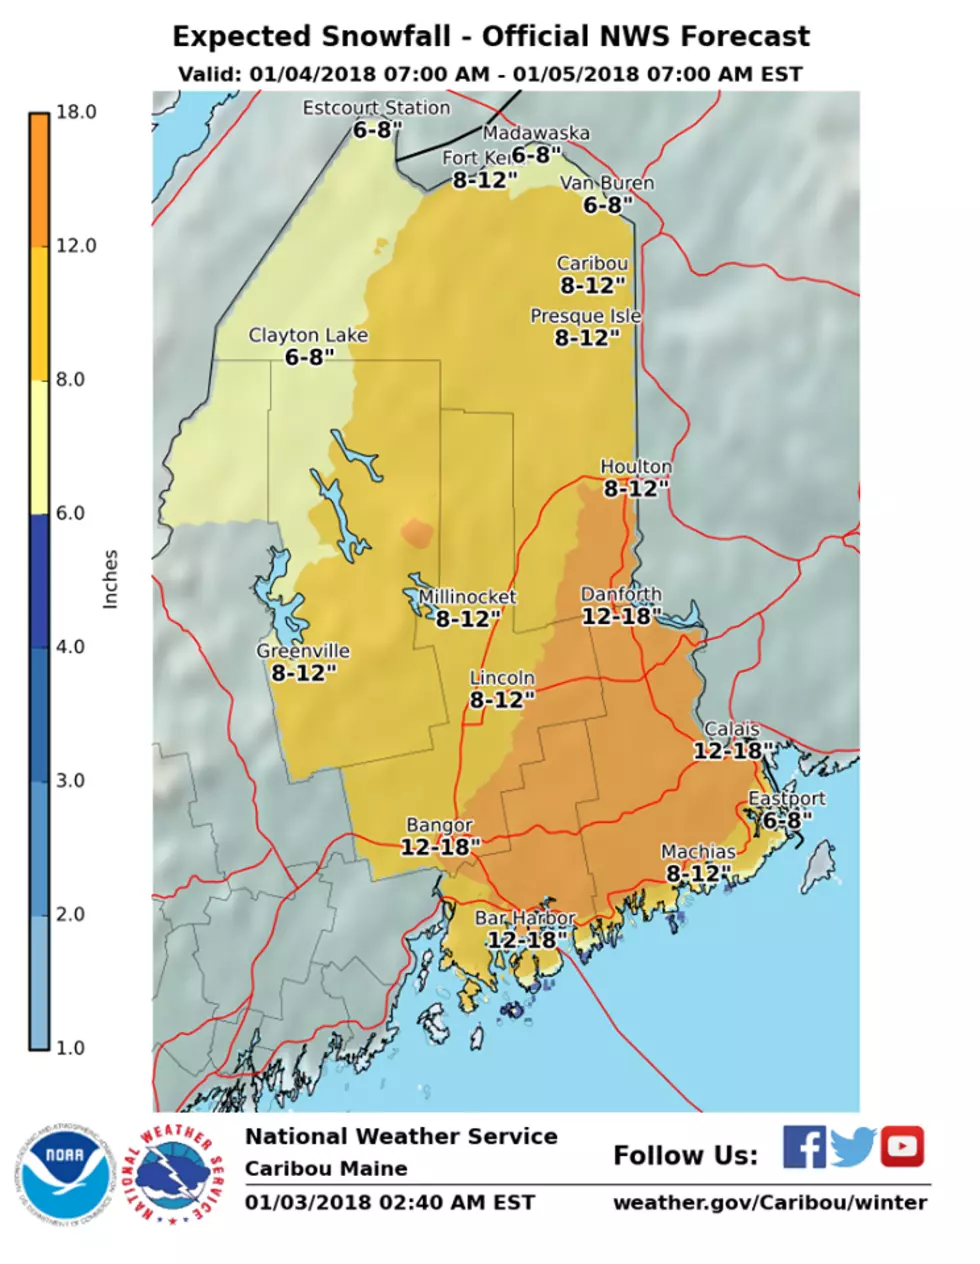 Blizzard Warning for Downeast Maine From Noon Thursday January 4th to 7AM Friday January 5th